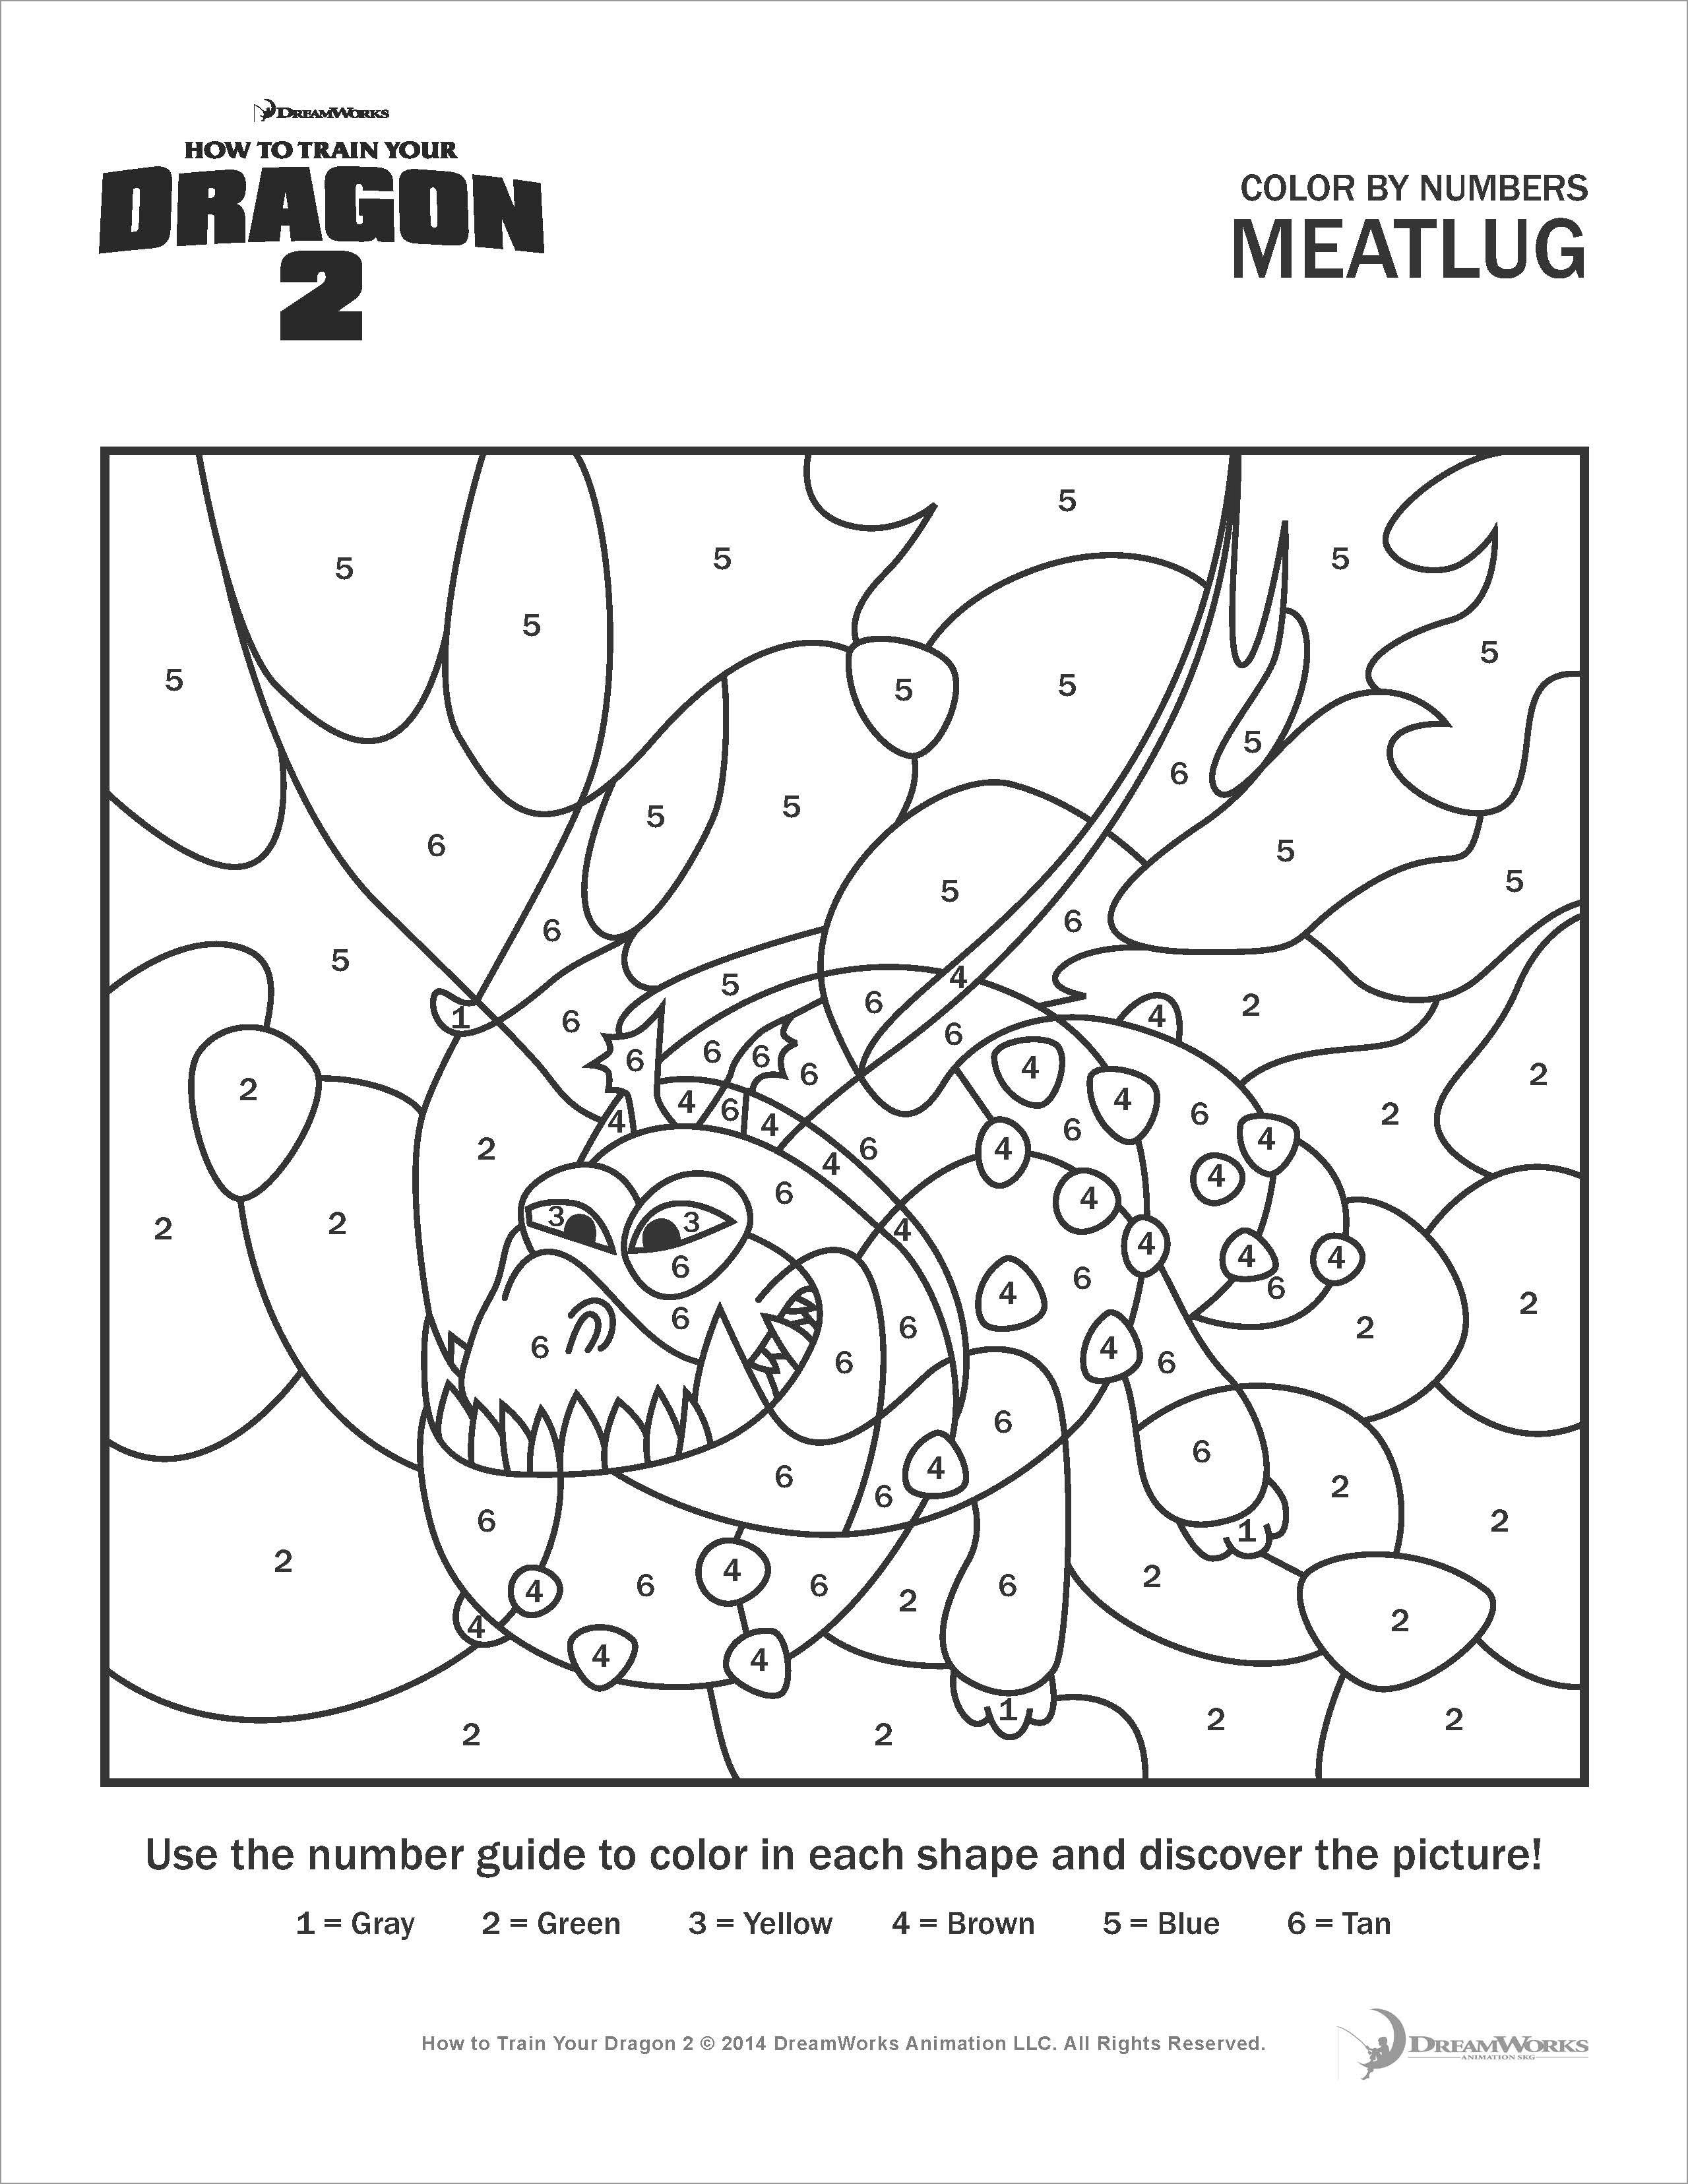 How to Train Your Dragon Meatlug Color by Number Coloring Page ...